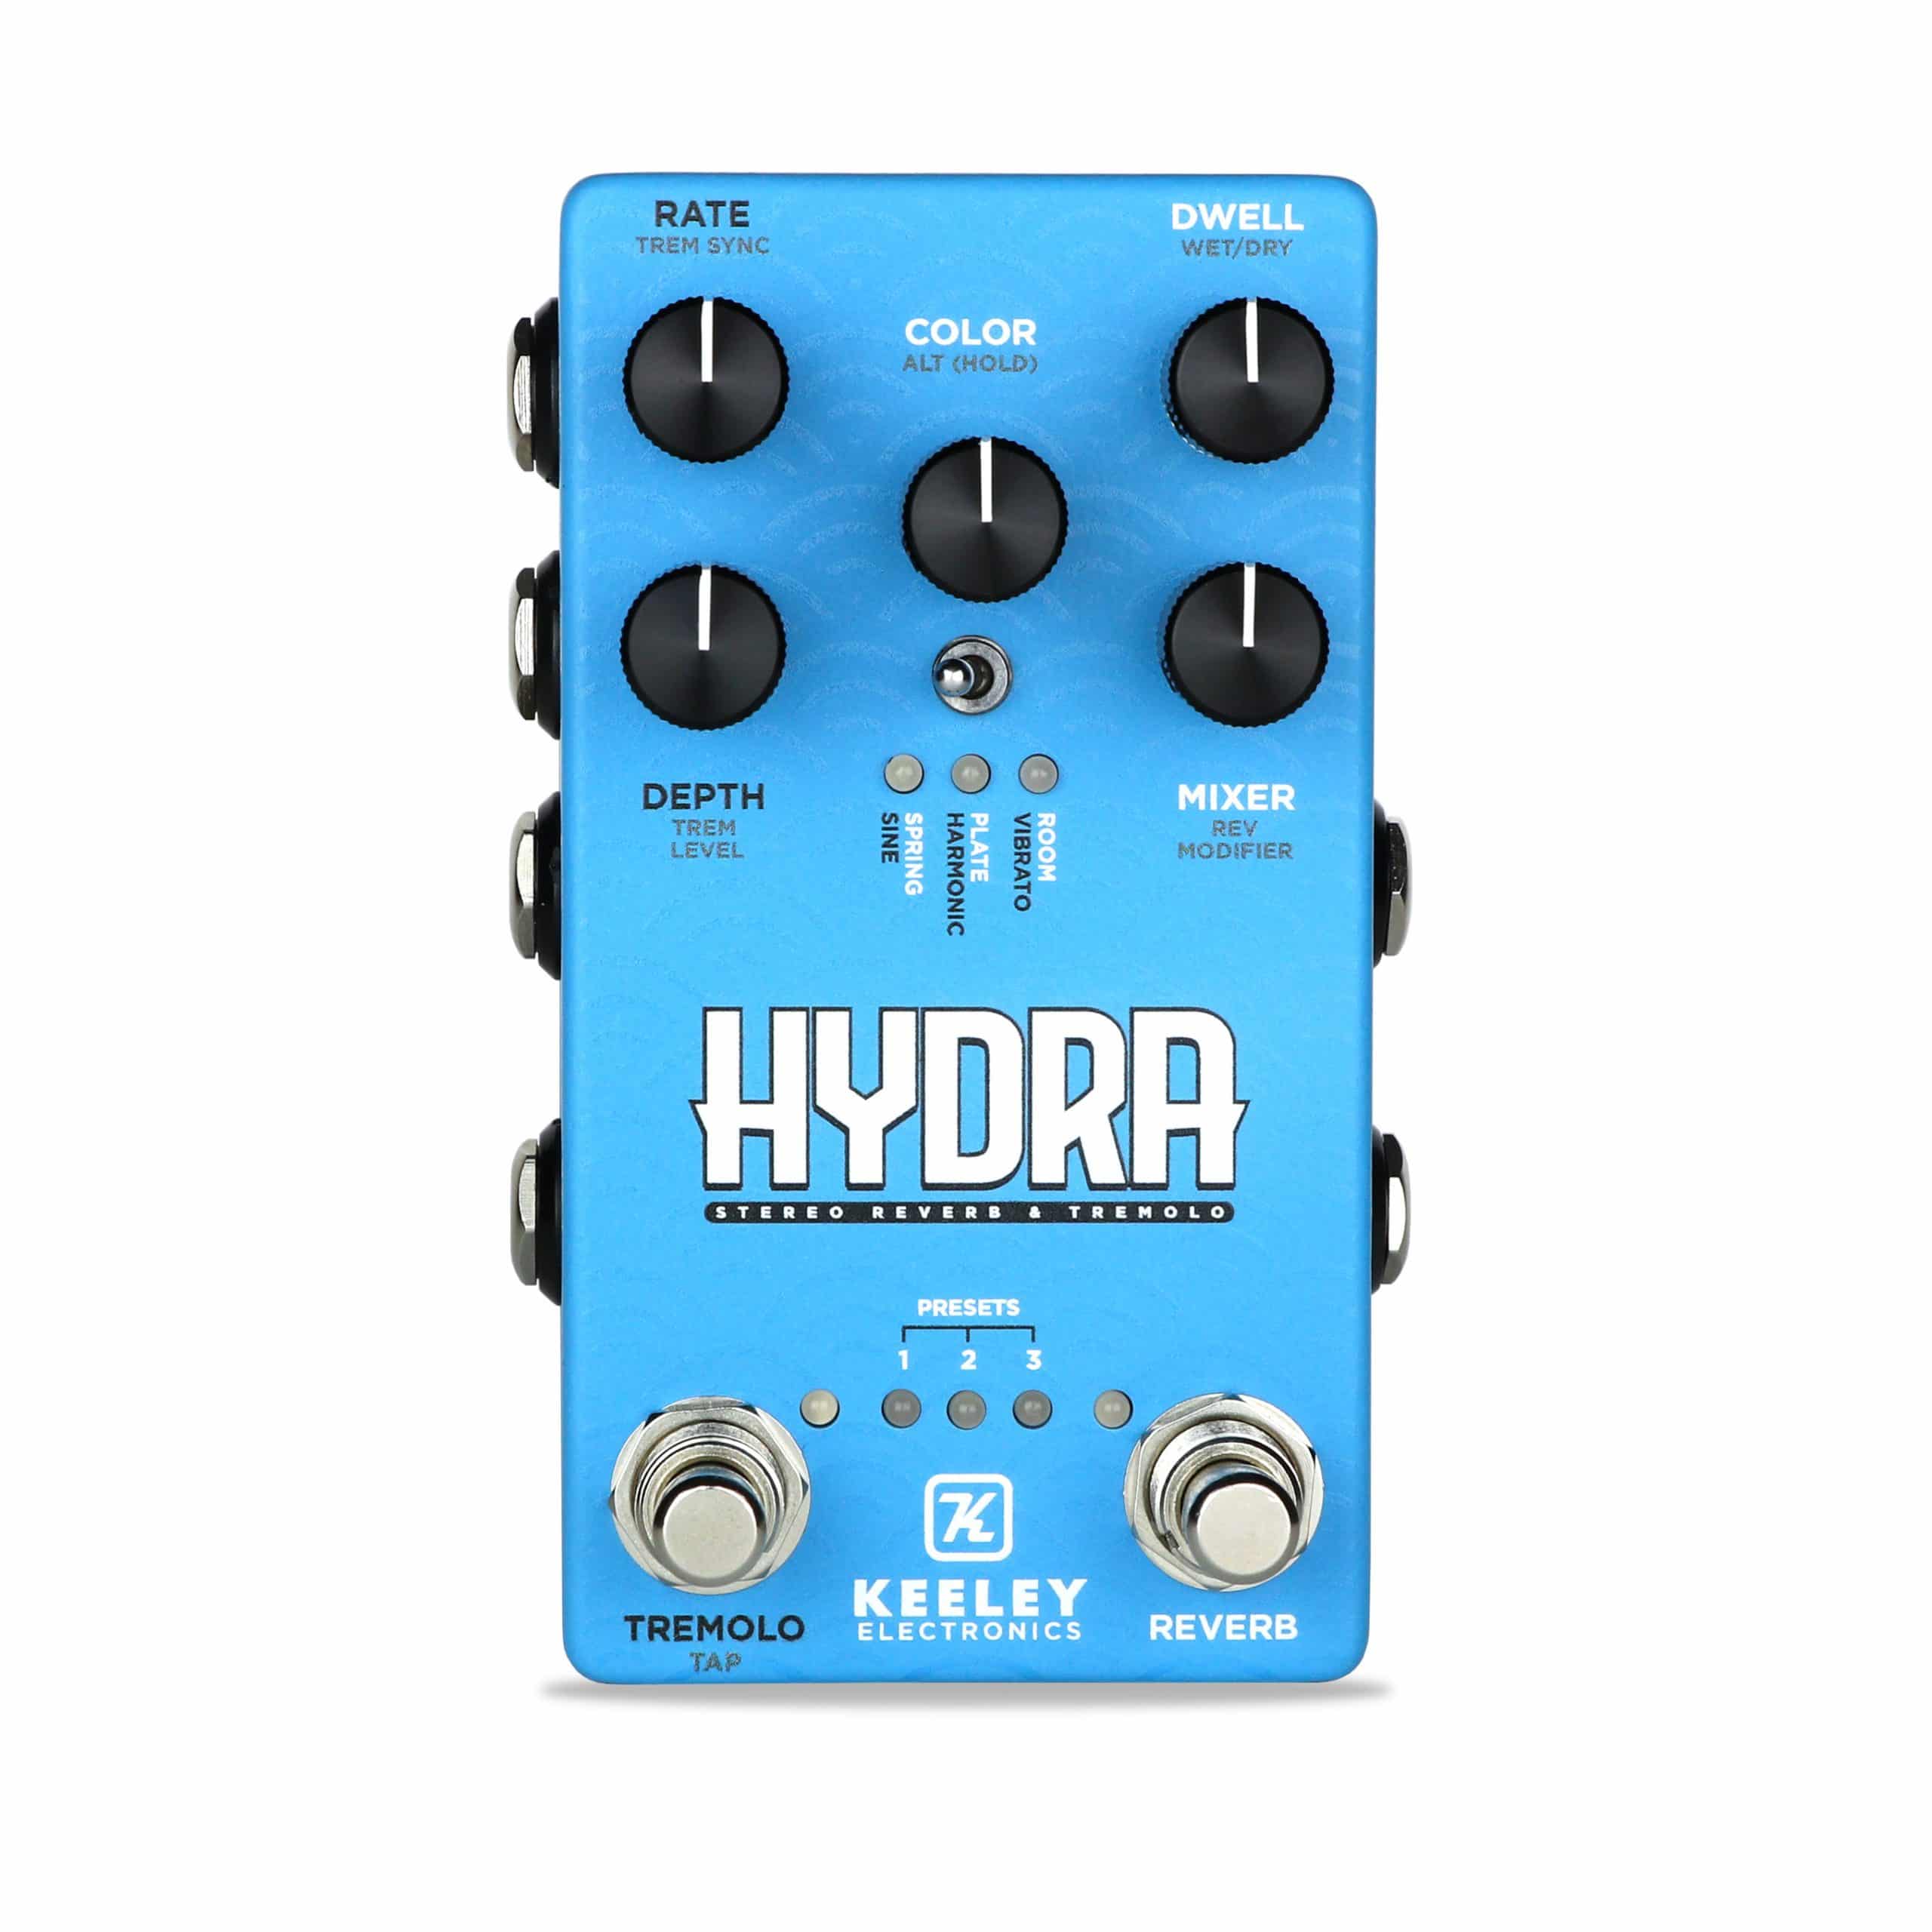 Keeley-Electronics-HYDRA-Stereo-Reverb-Tremolo-Effect-Pedal-Front-scaled-1